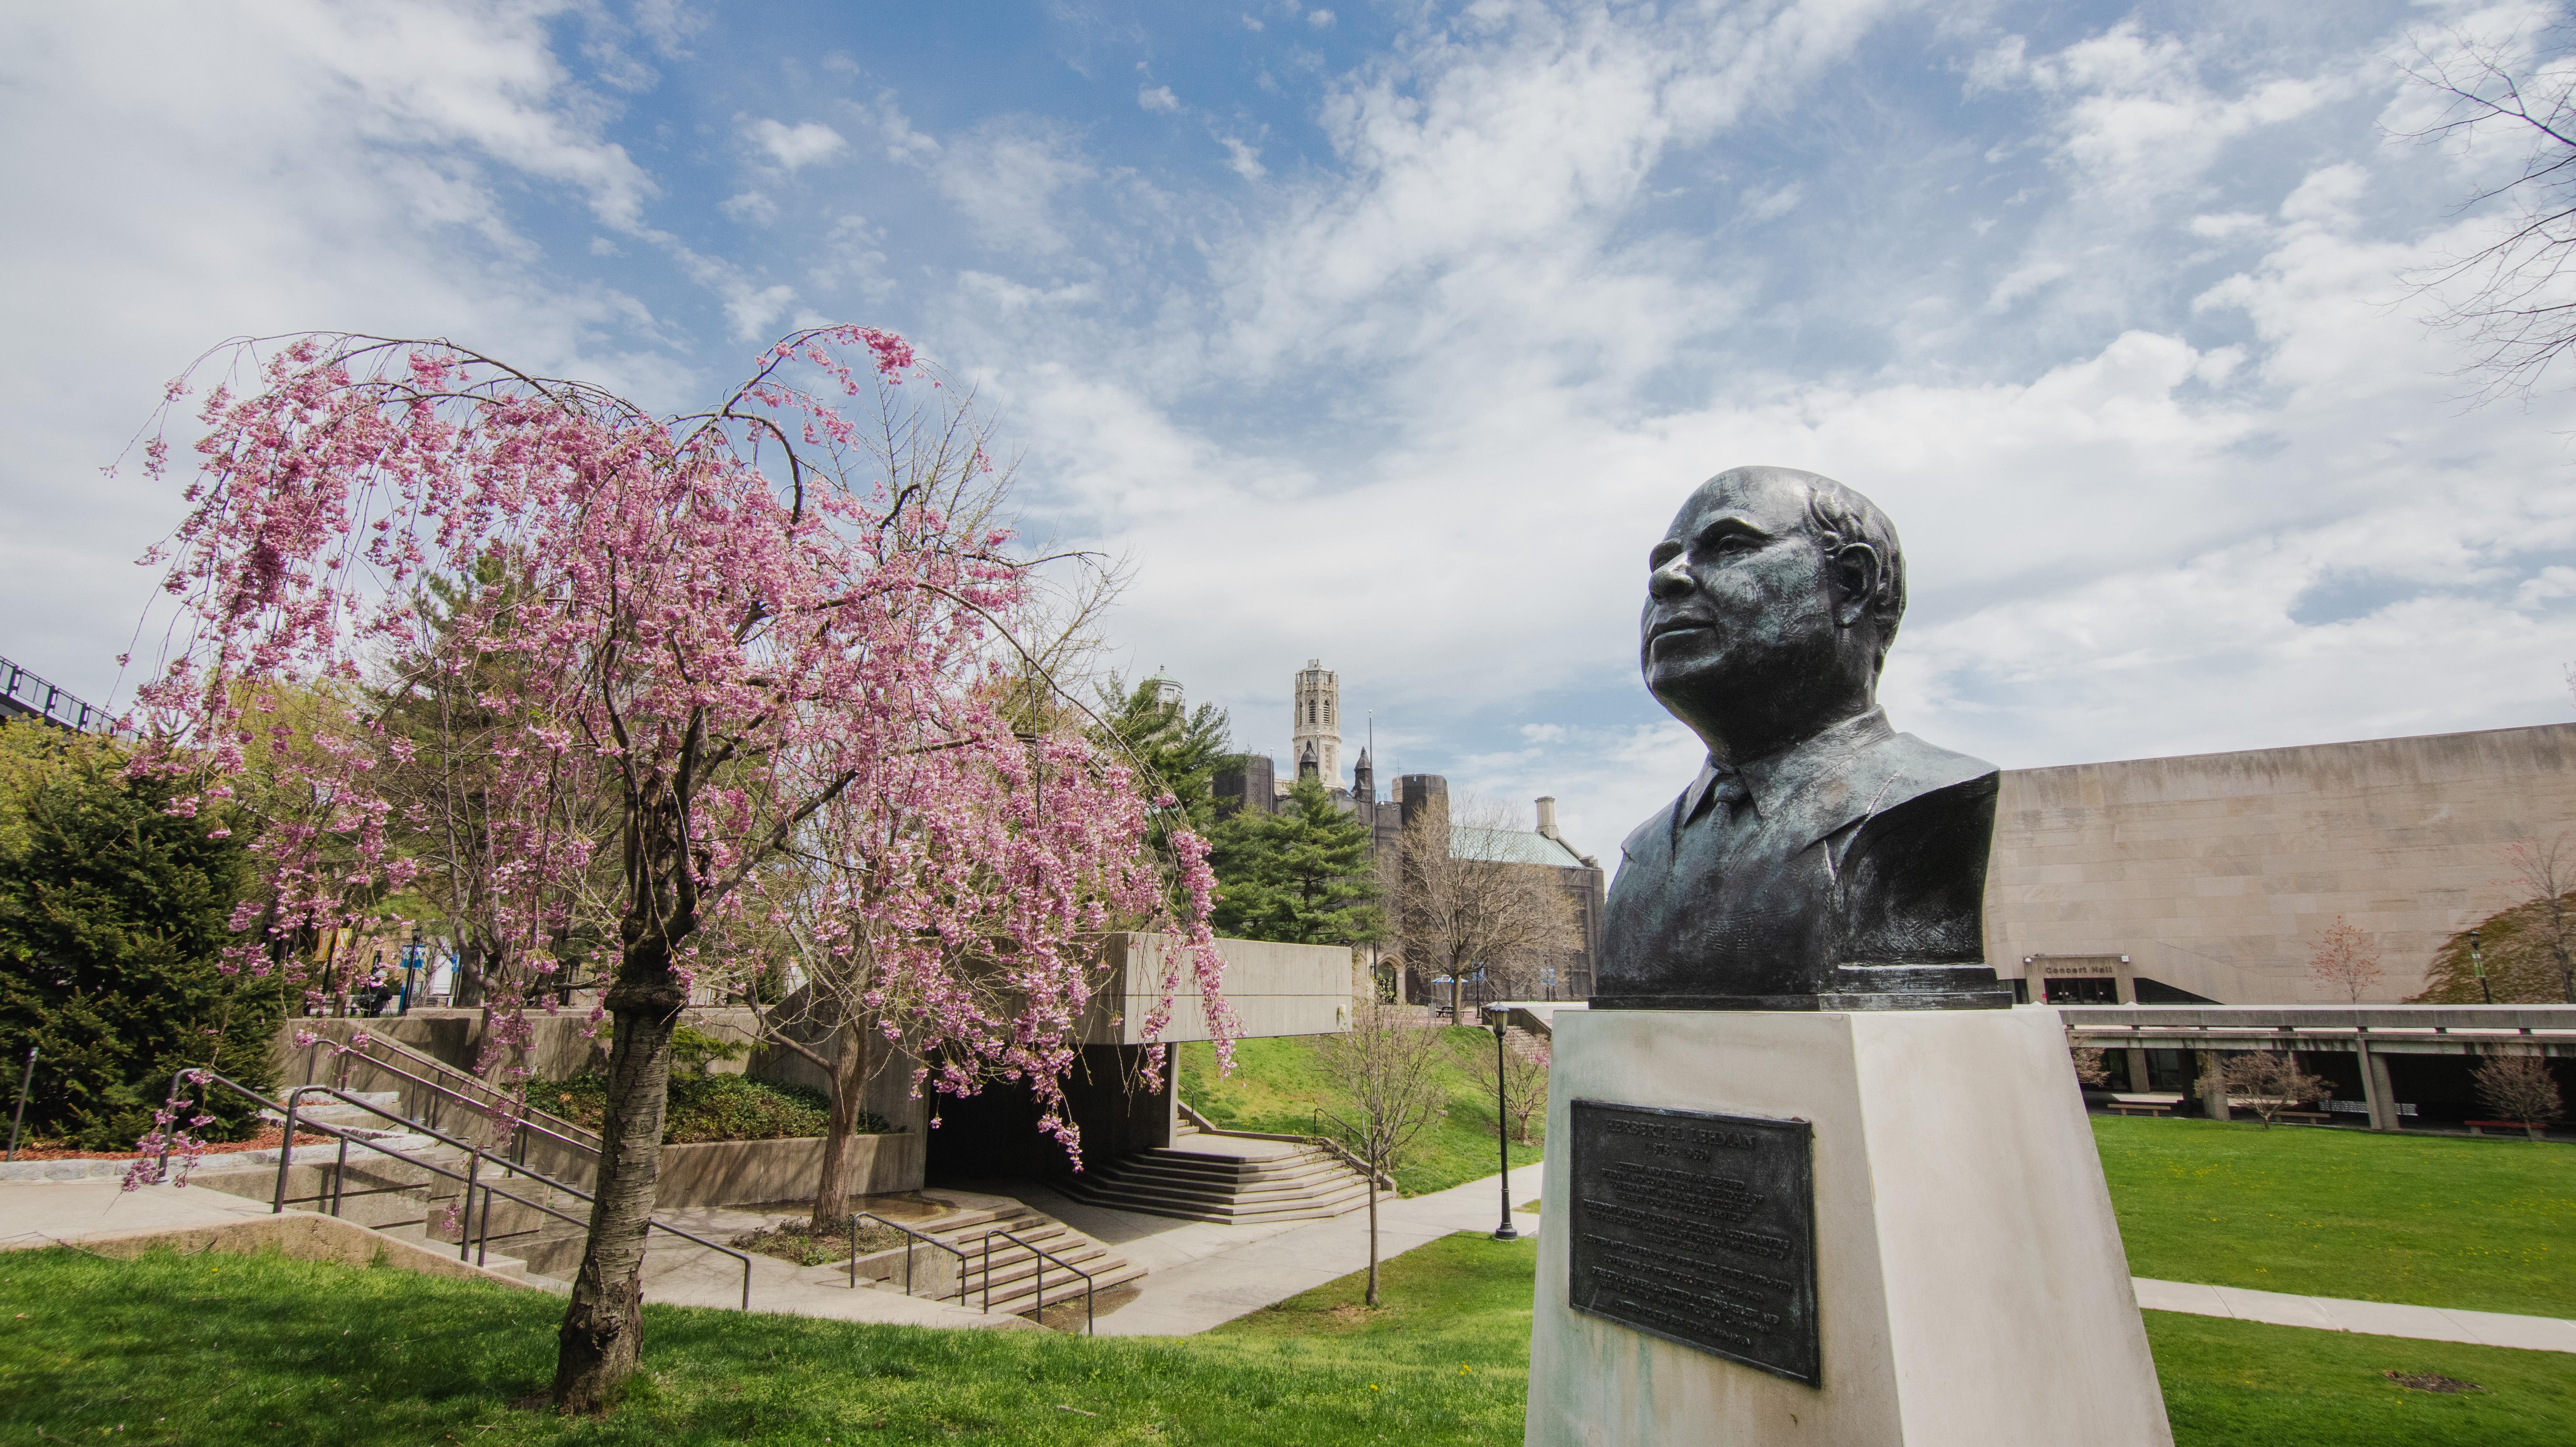 A view of the Lehman campus with a bust of Herbert Lehman in the right foreground with a blooming tree in the left background.